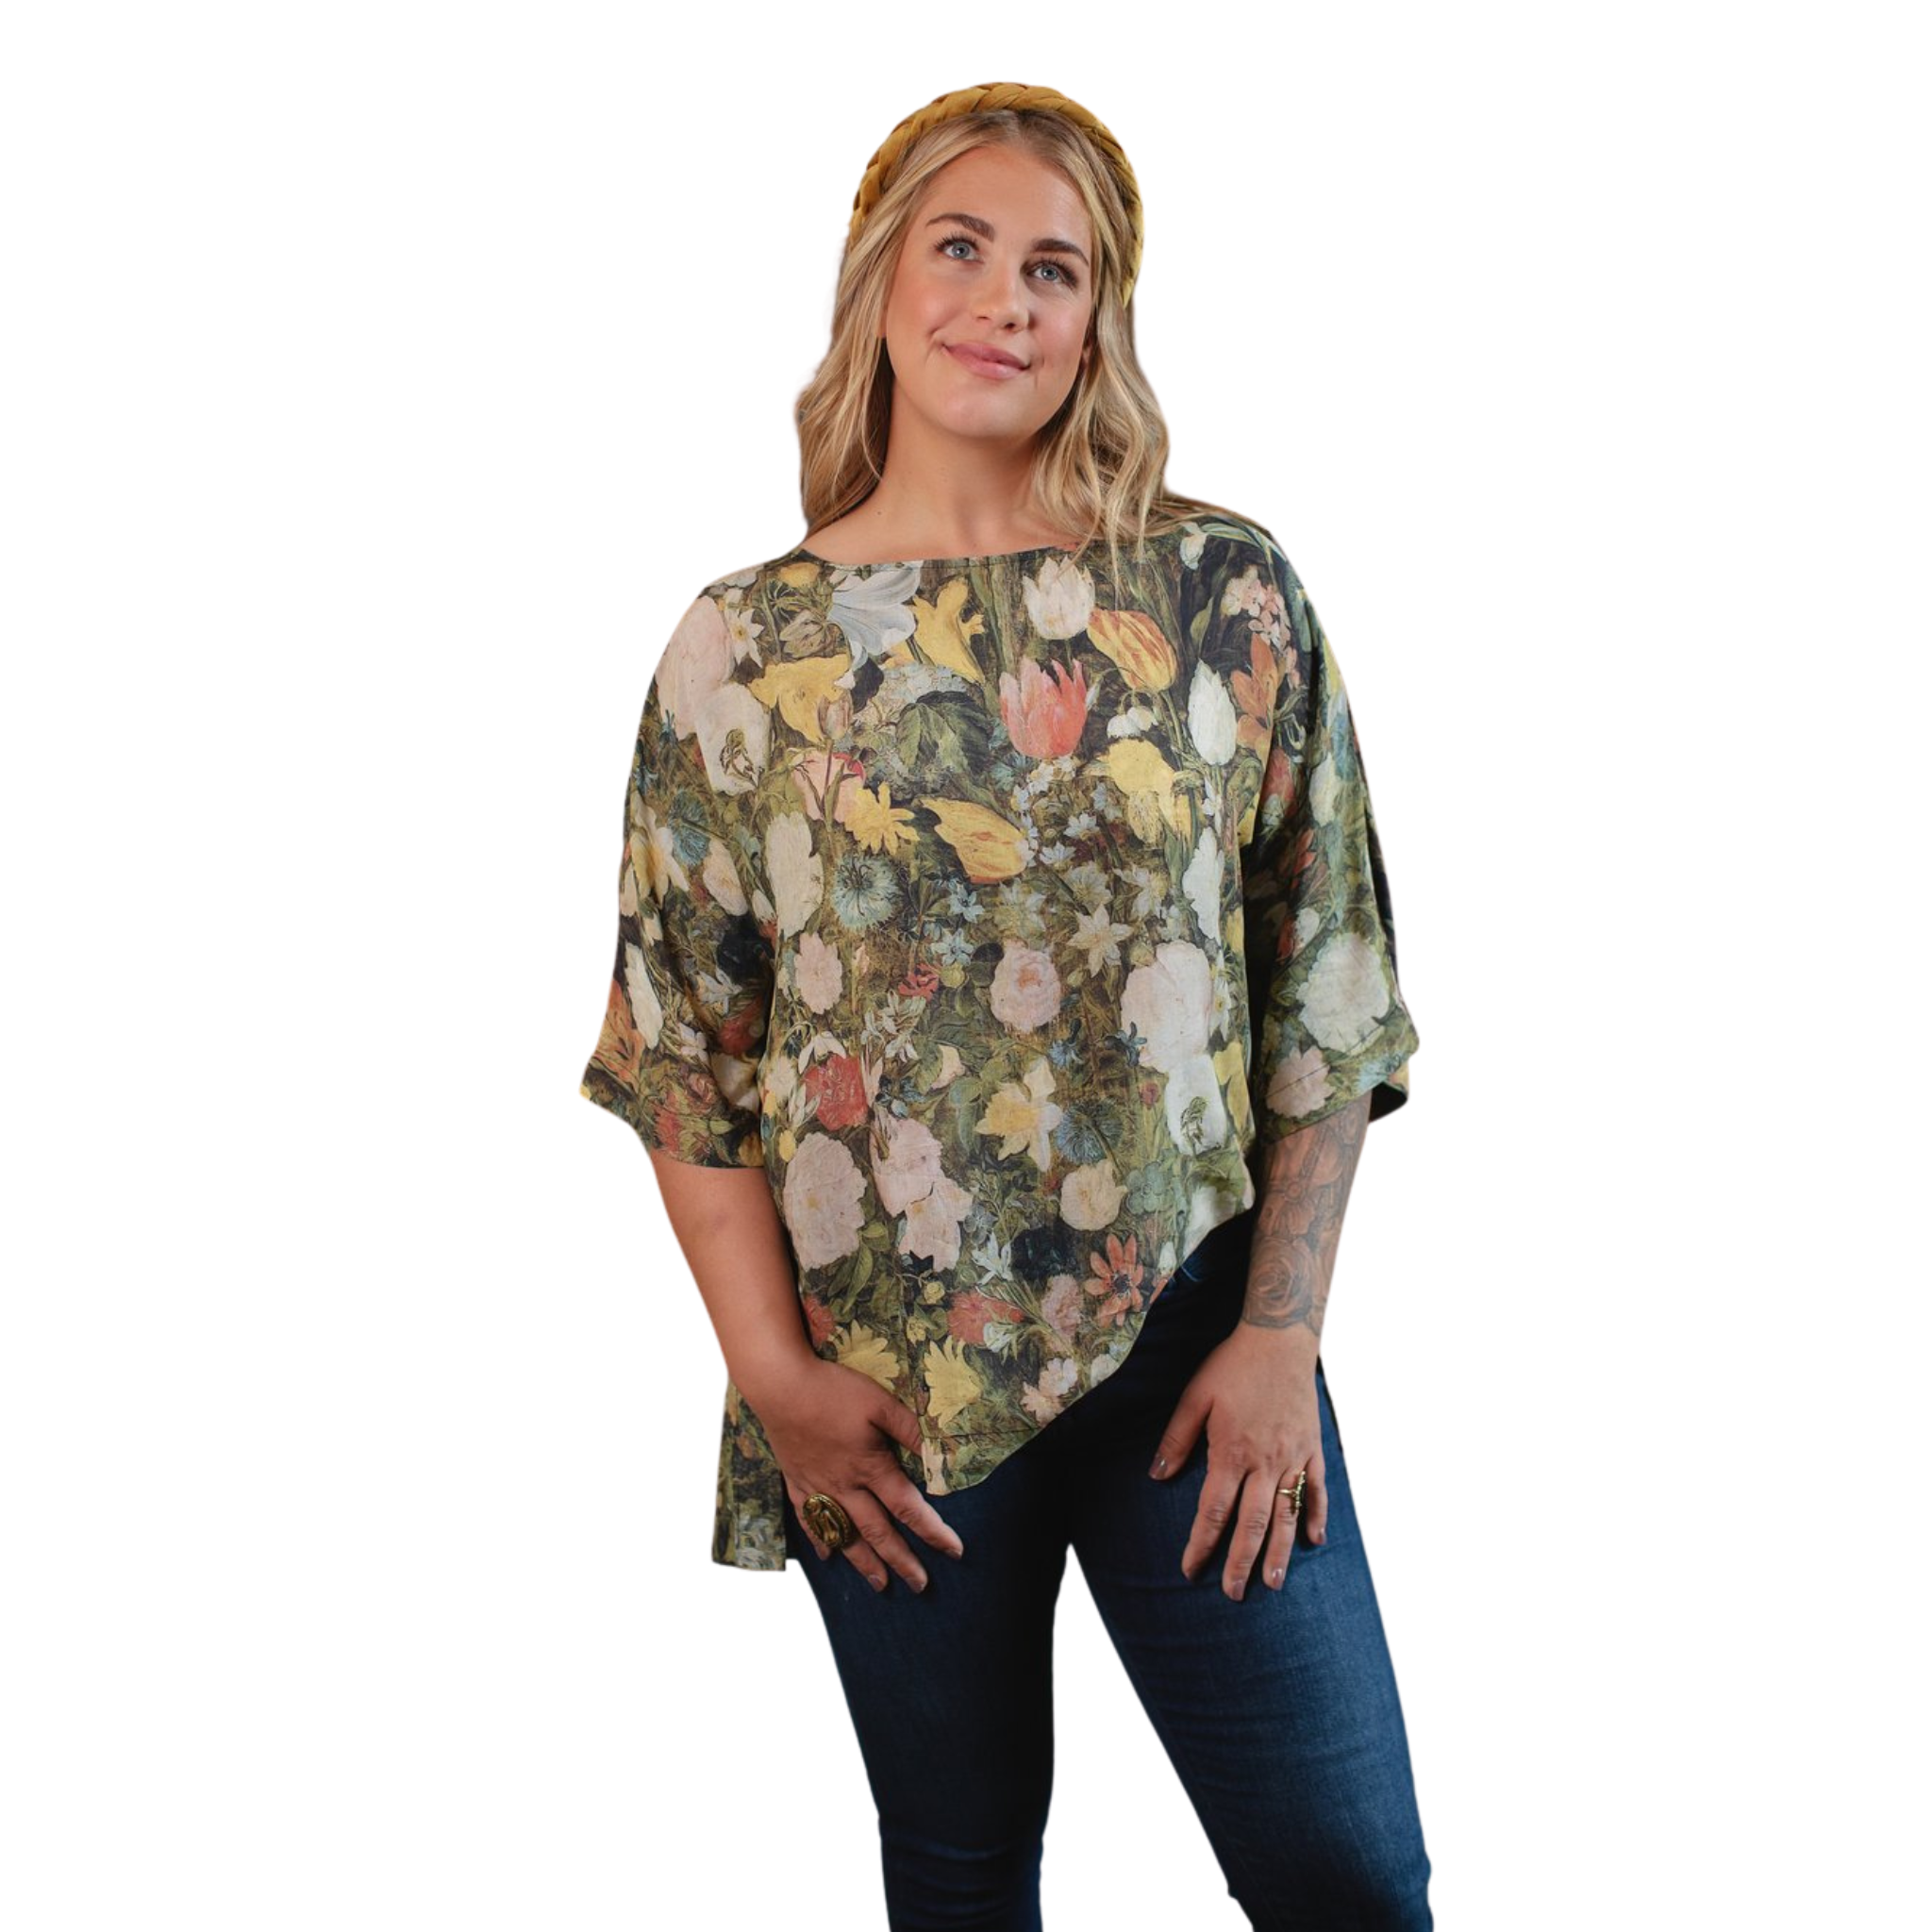 I Dream in Flowers Luxe Tee Shirt